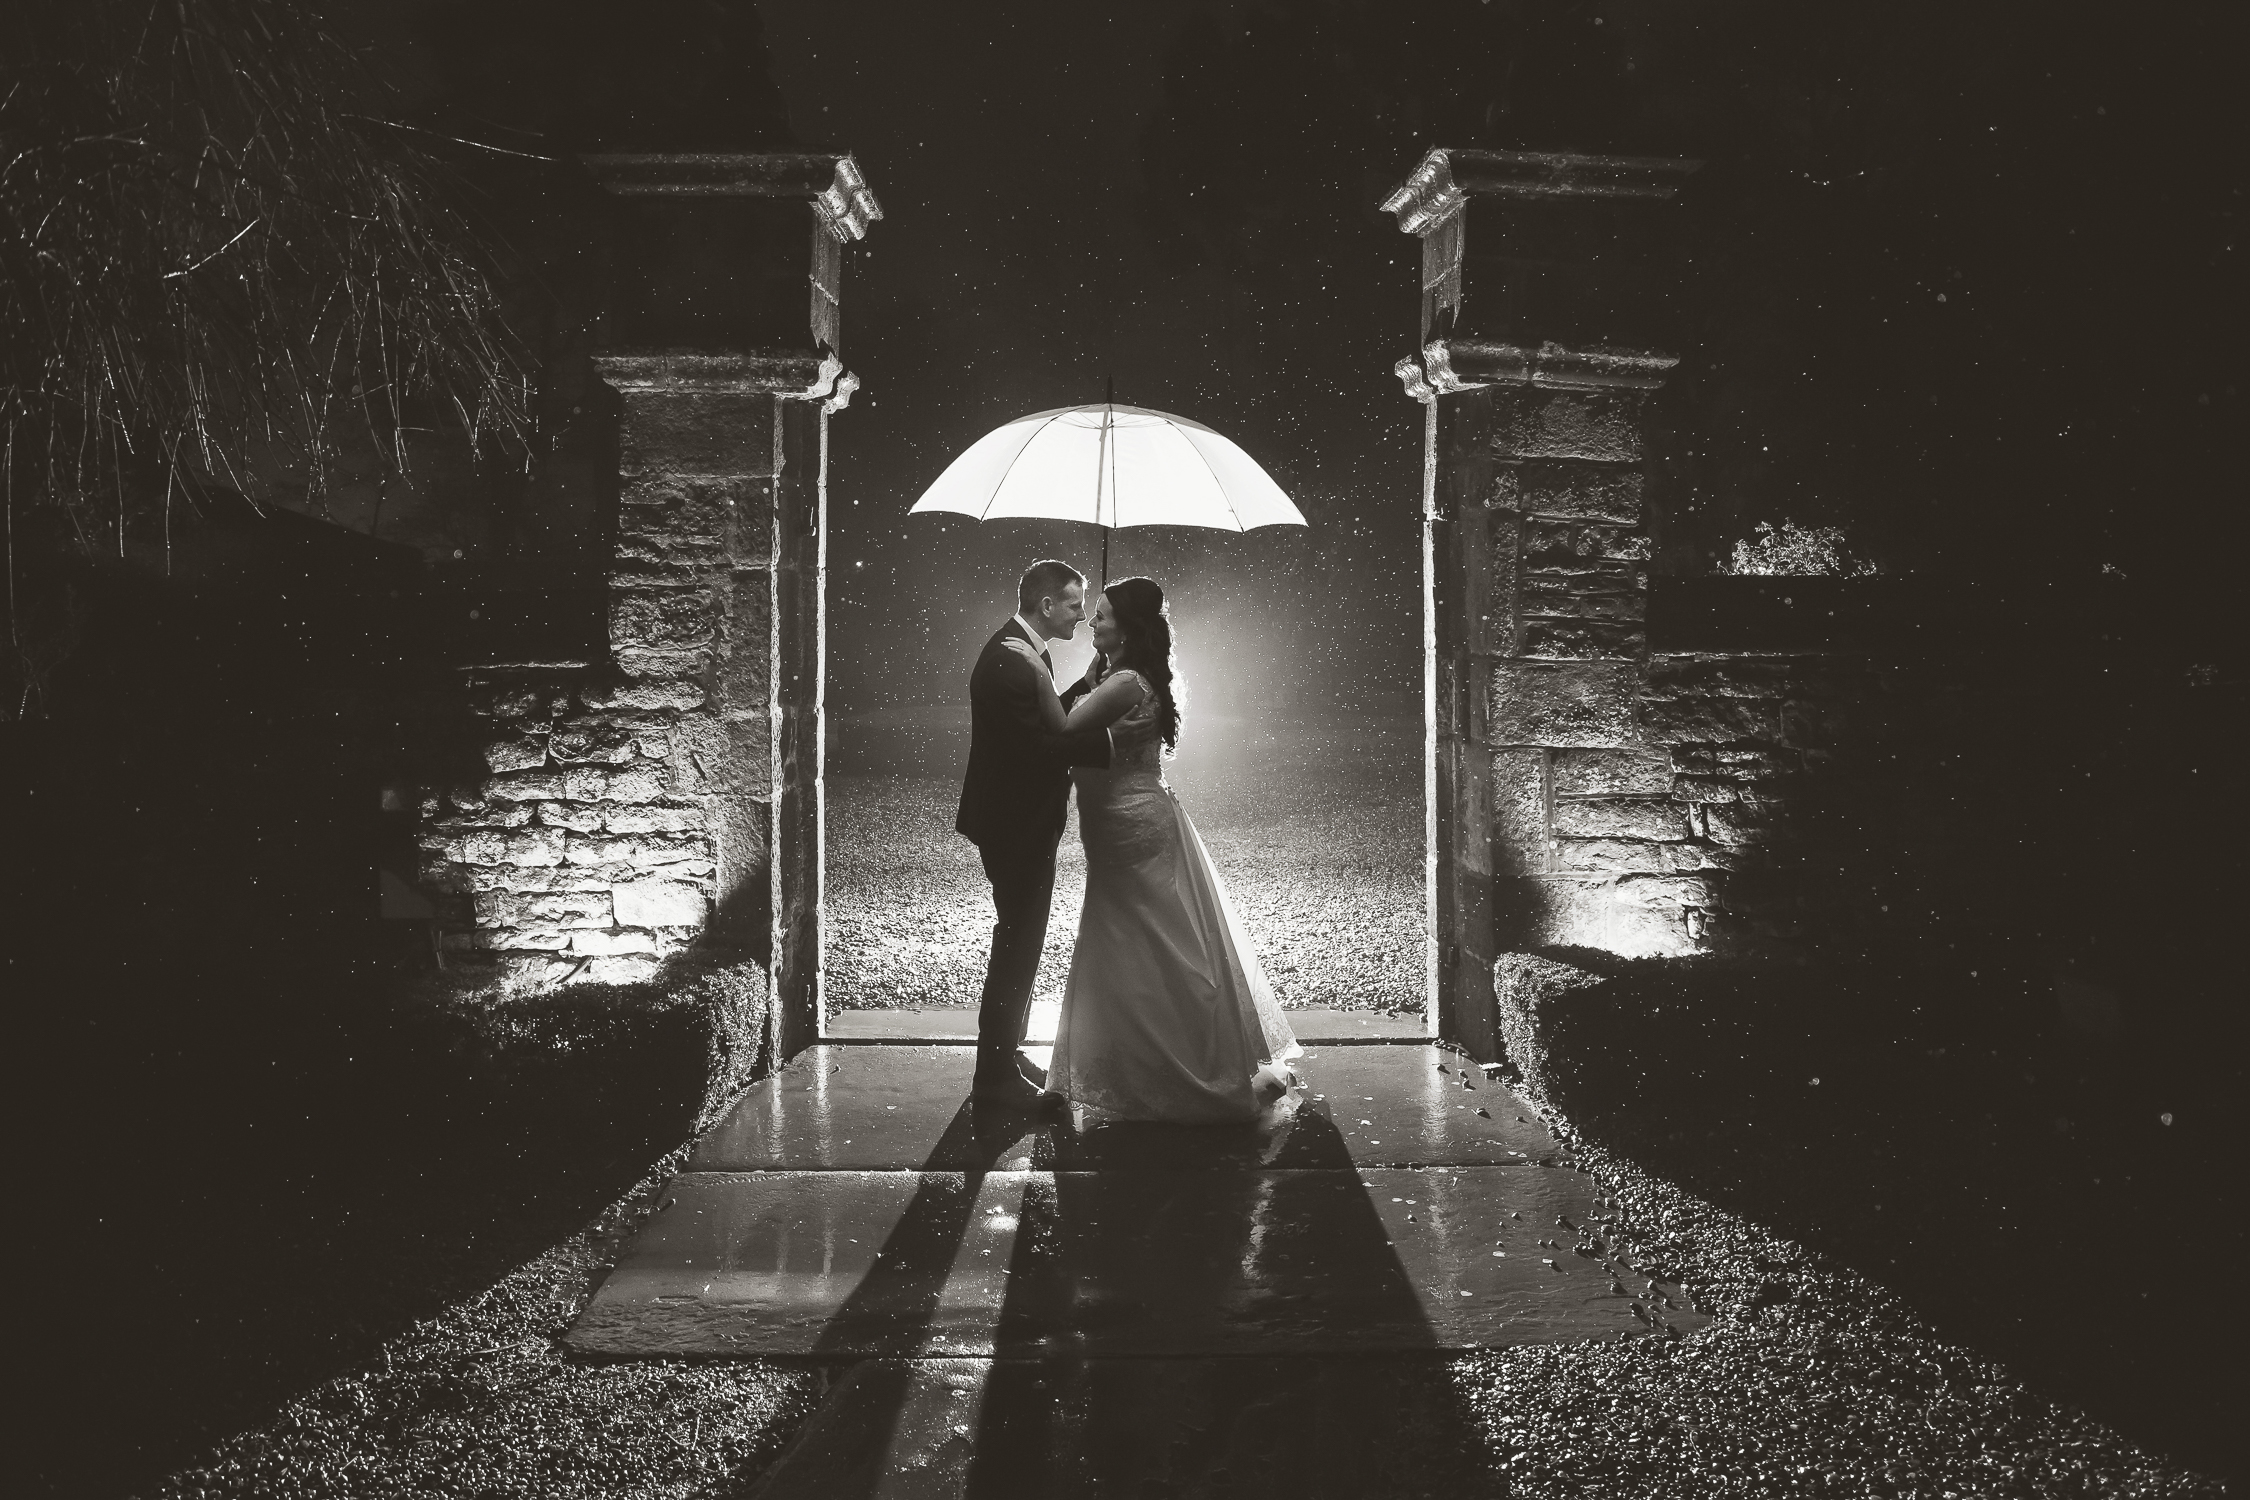 A bride and groom standing under an umbrella in the dark.